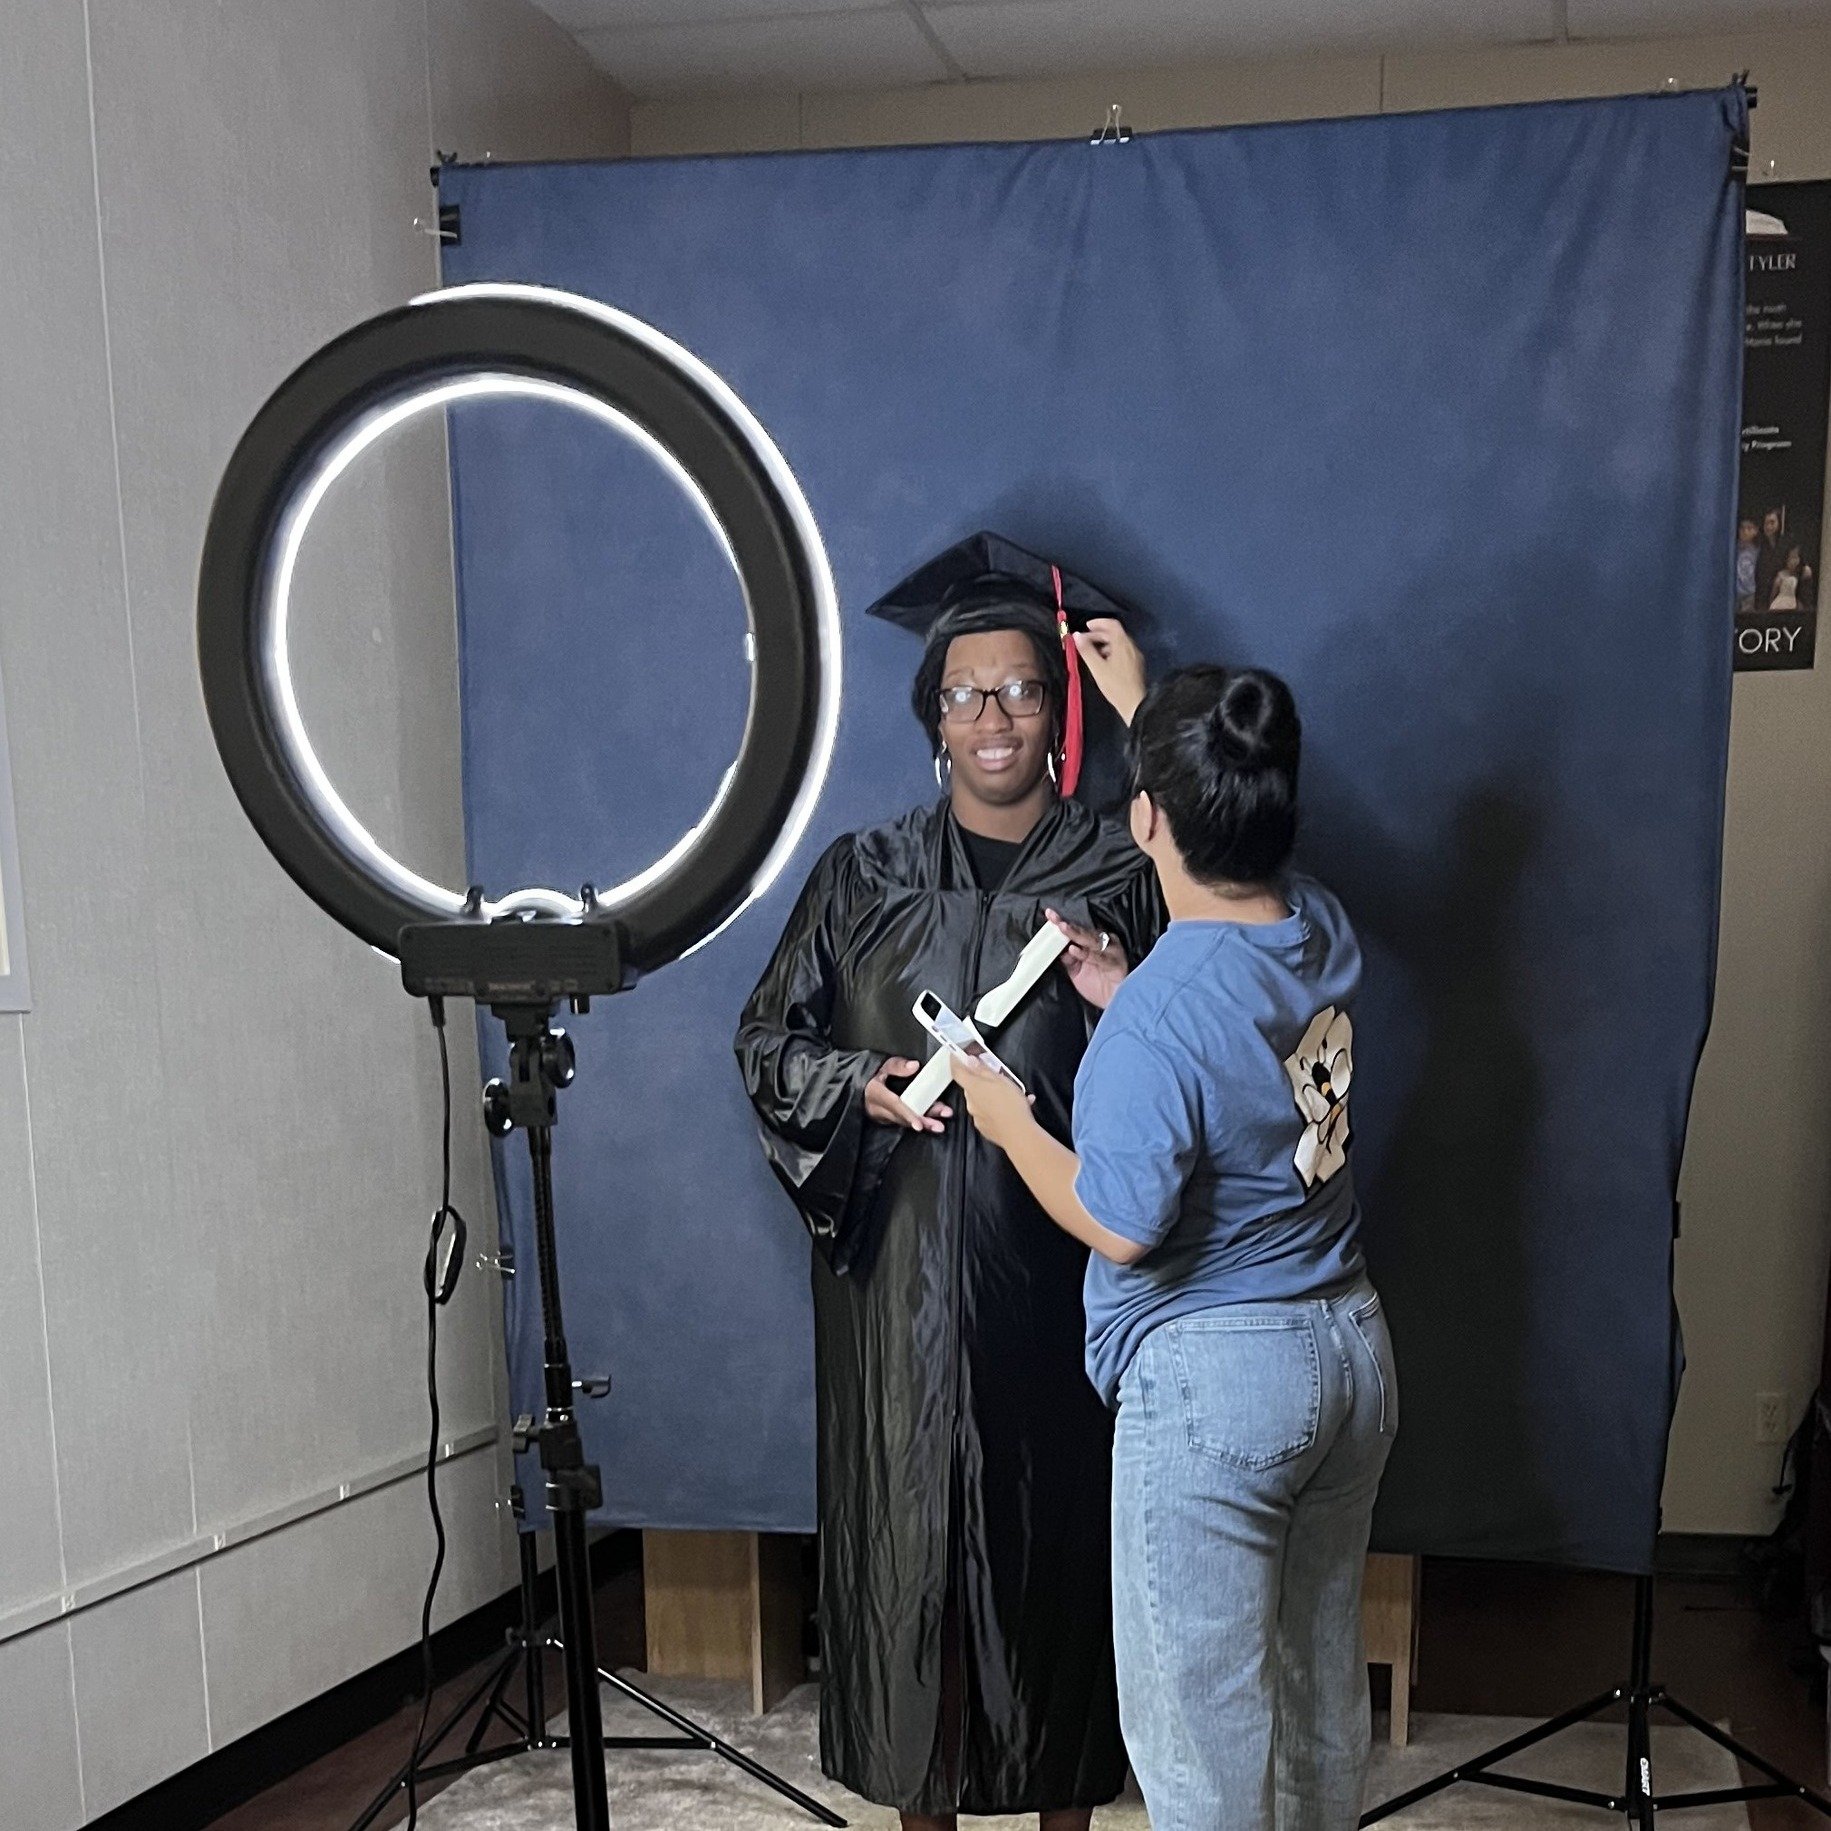 Graduation season is here! Our GED and Career Pathways graduates are gearing up for next week's big ceremony, picking up their caps and gowns, and our team is hosting photos for them! 🎓 But it's not just about the photos &ndash; we're also discussin